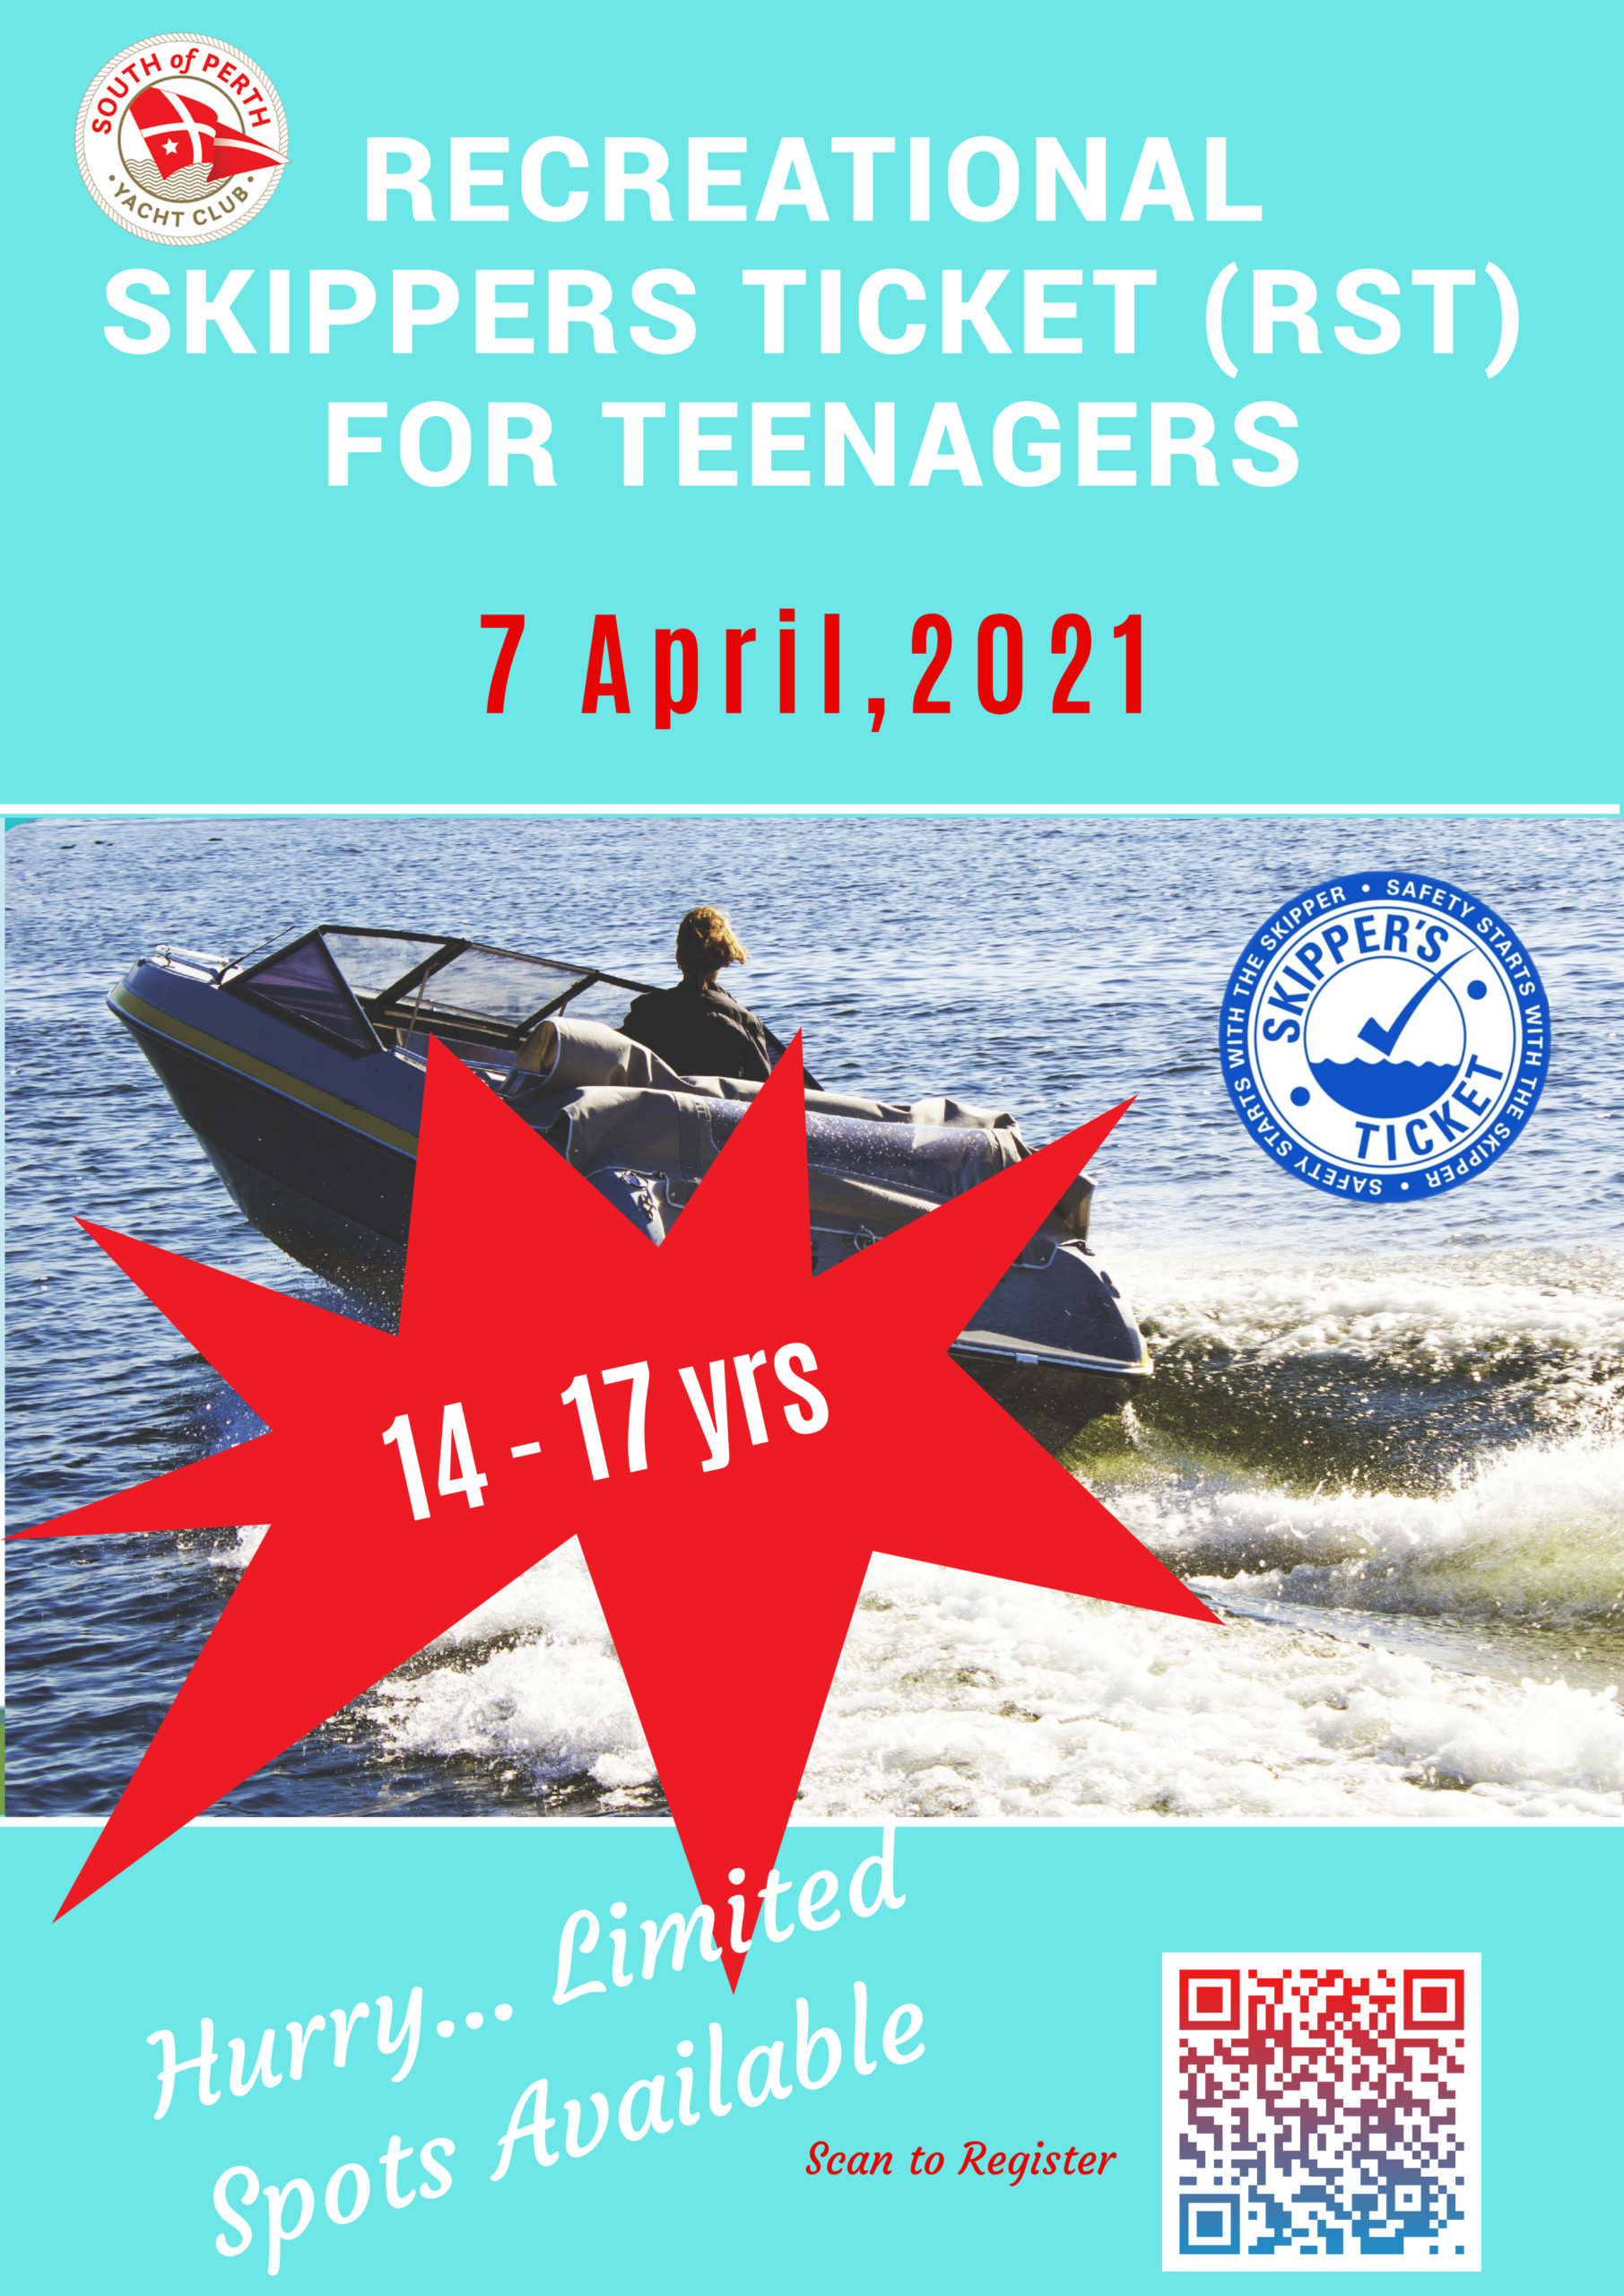 Recreational Skippers Ticket (RST) for teenagers